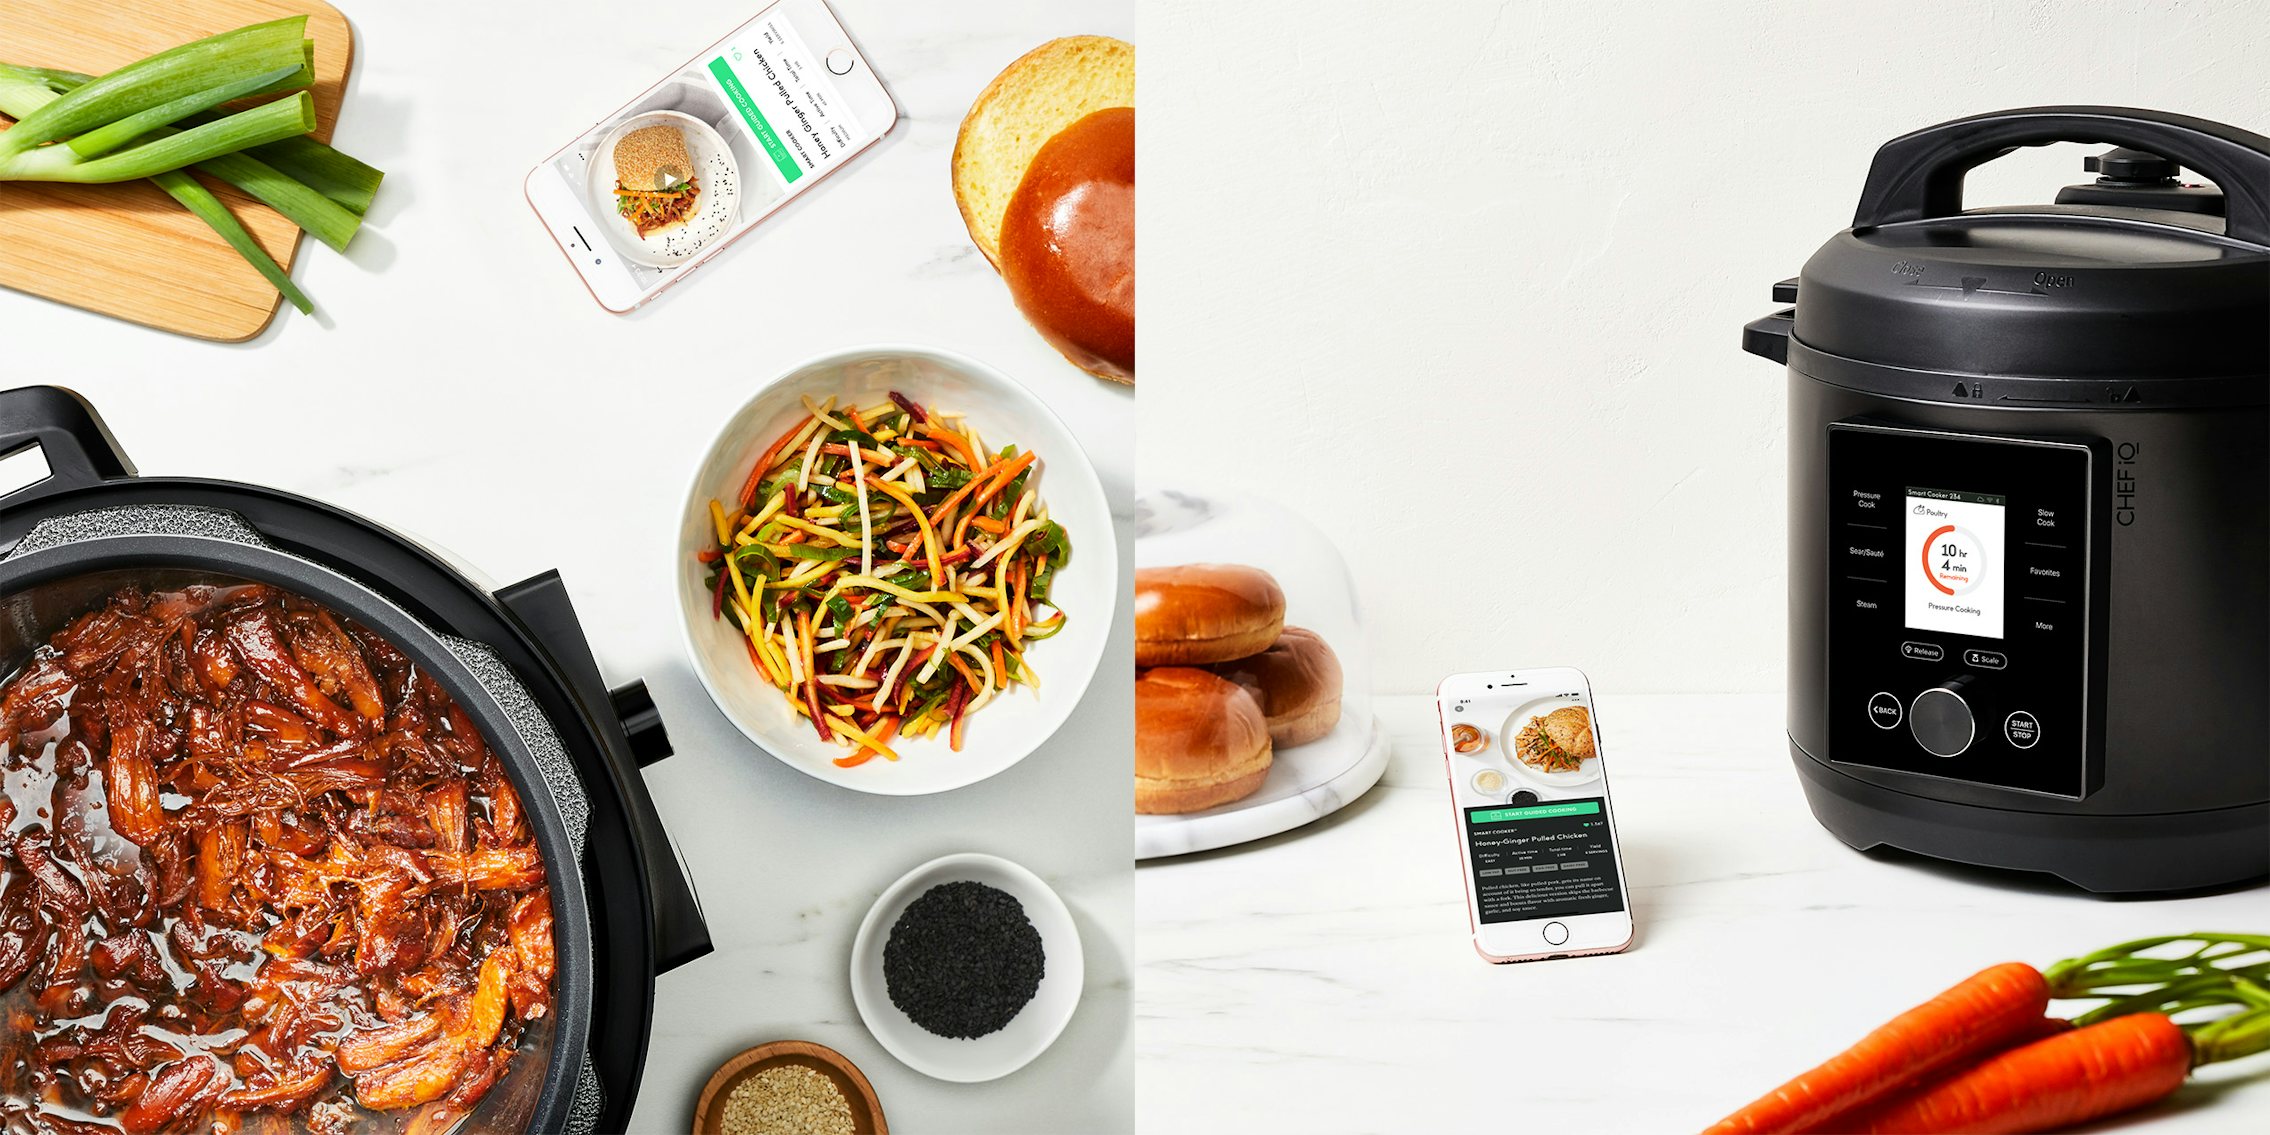 Chef iQ Smart Cooker Review: Guided Cooking Done Right